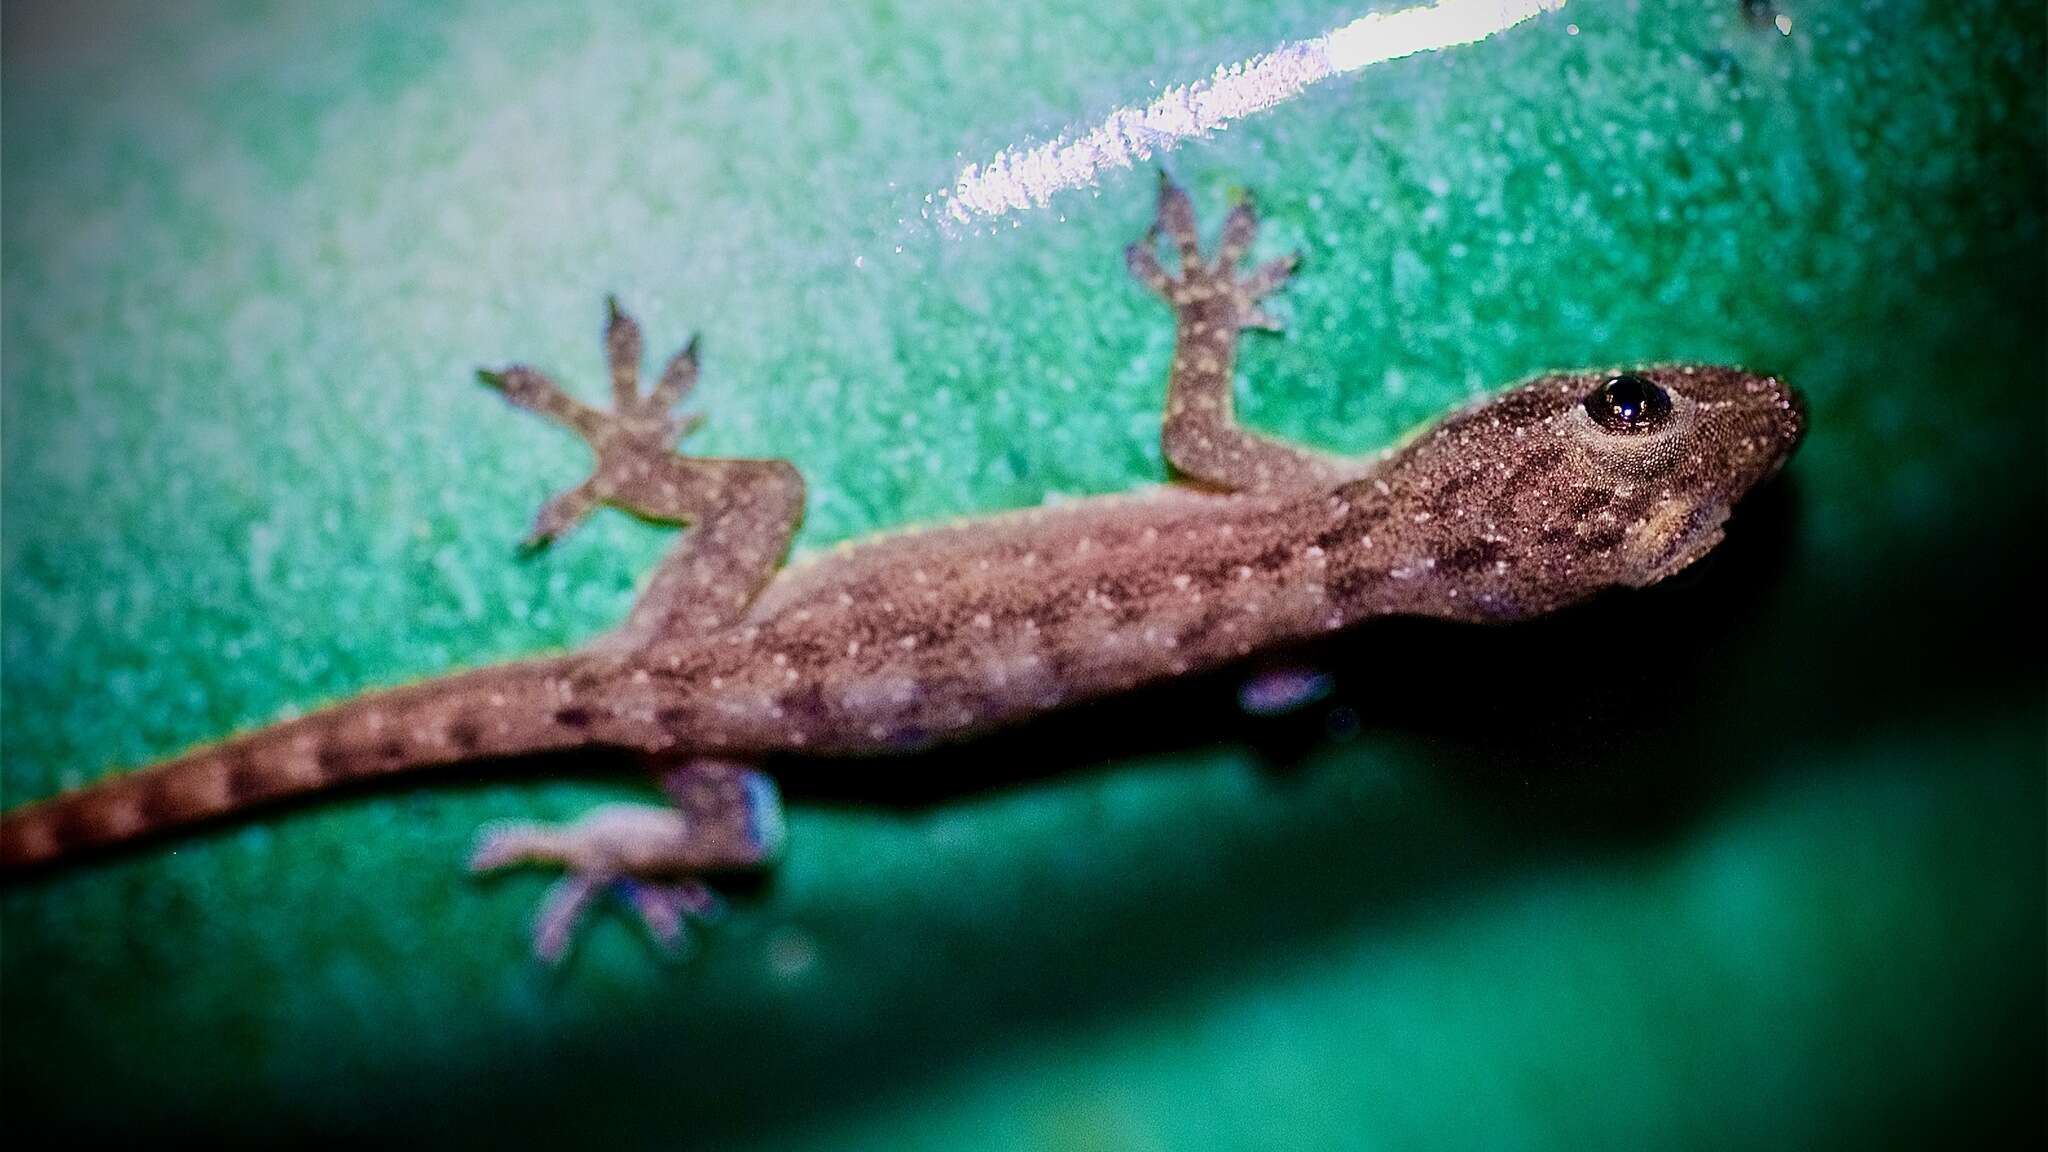 Image of Indo-Pacific gecko